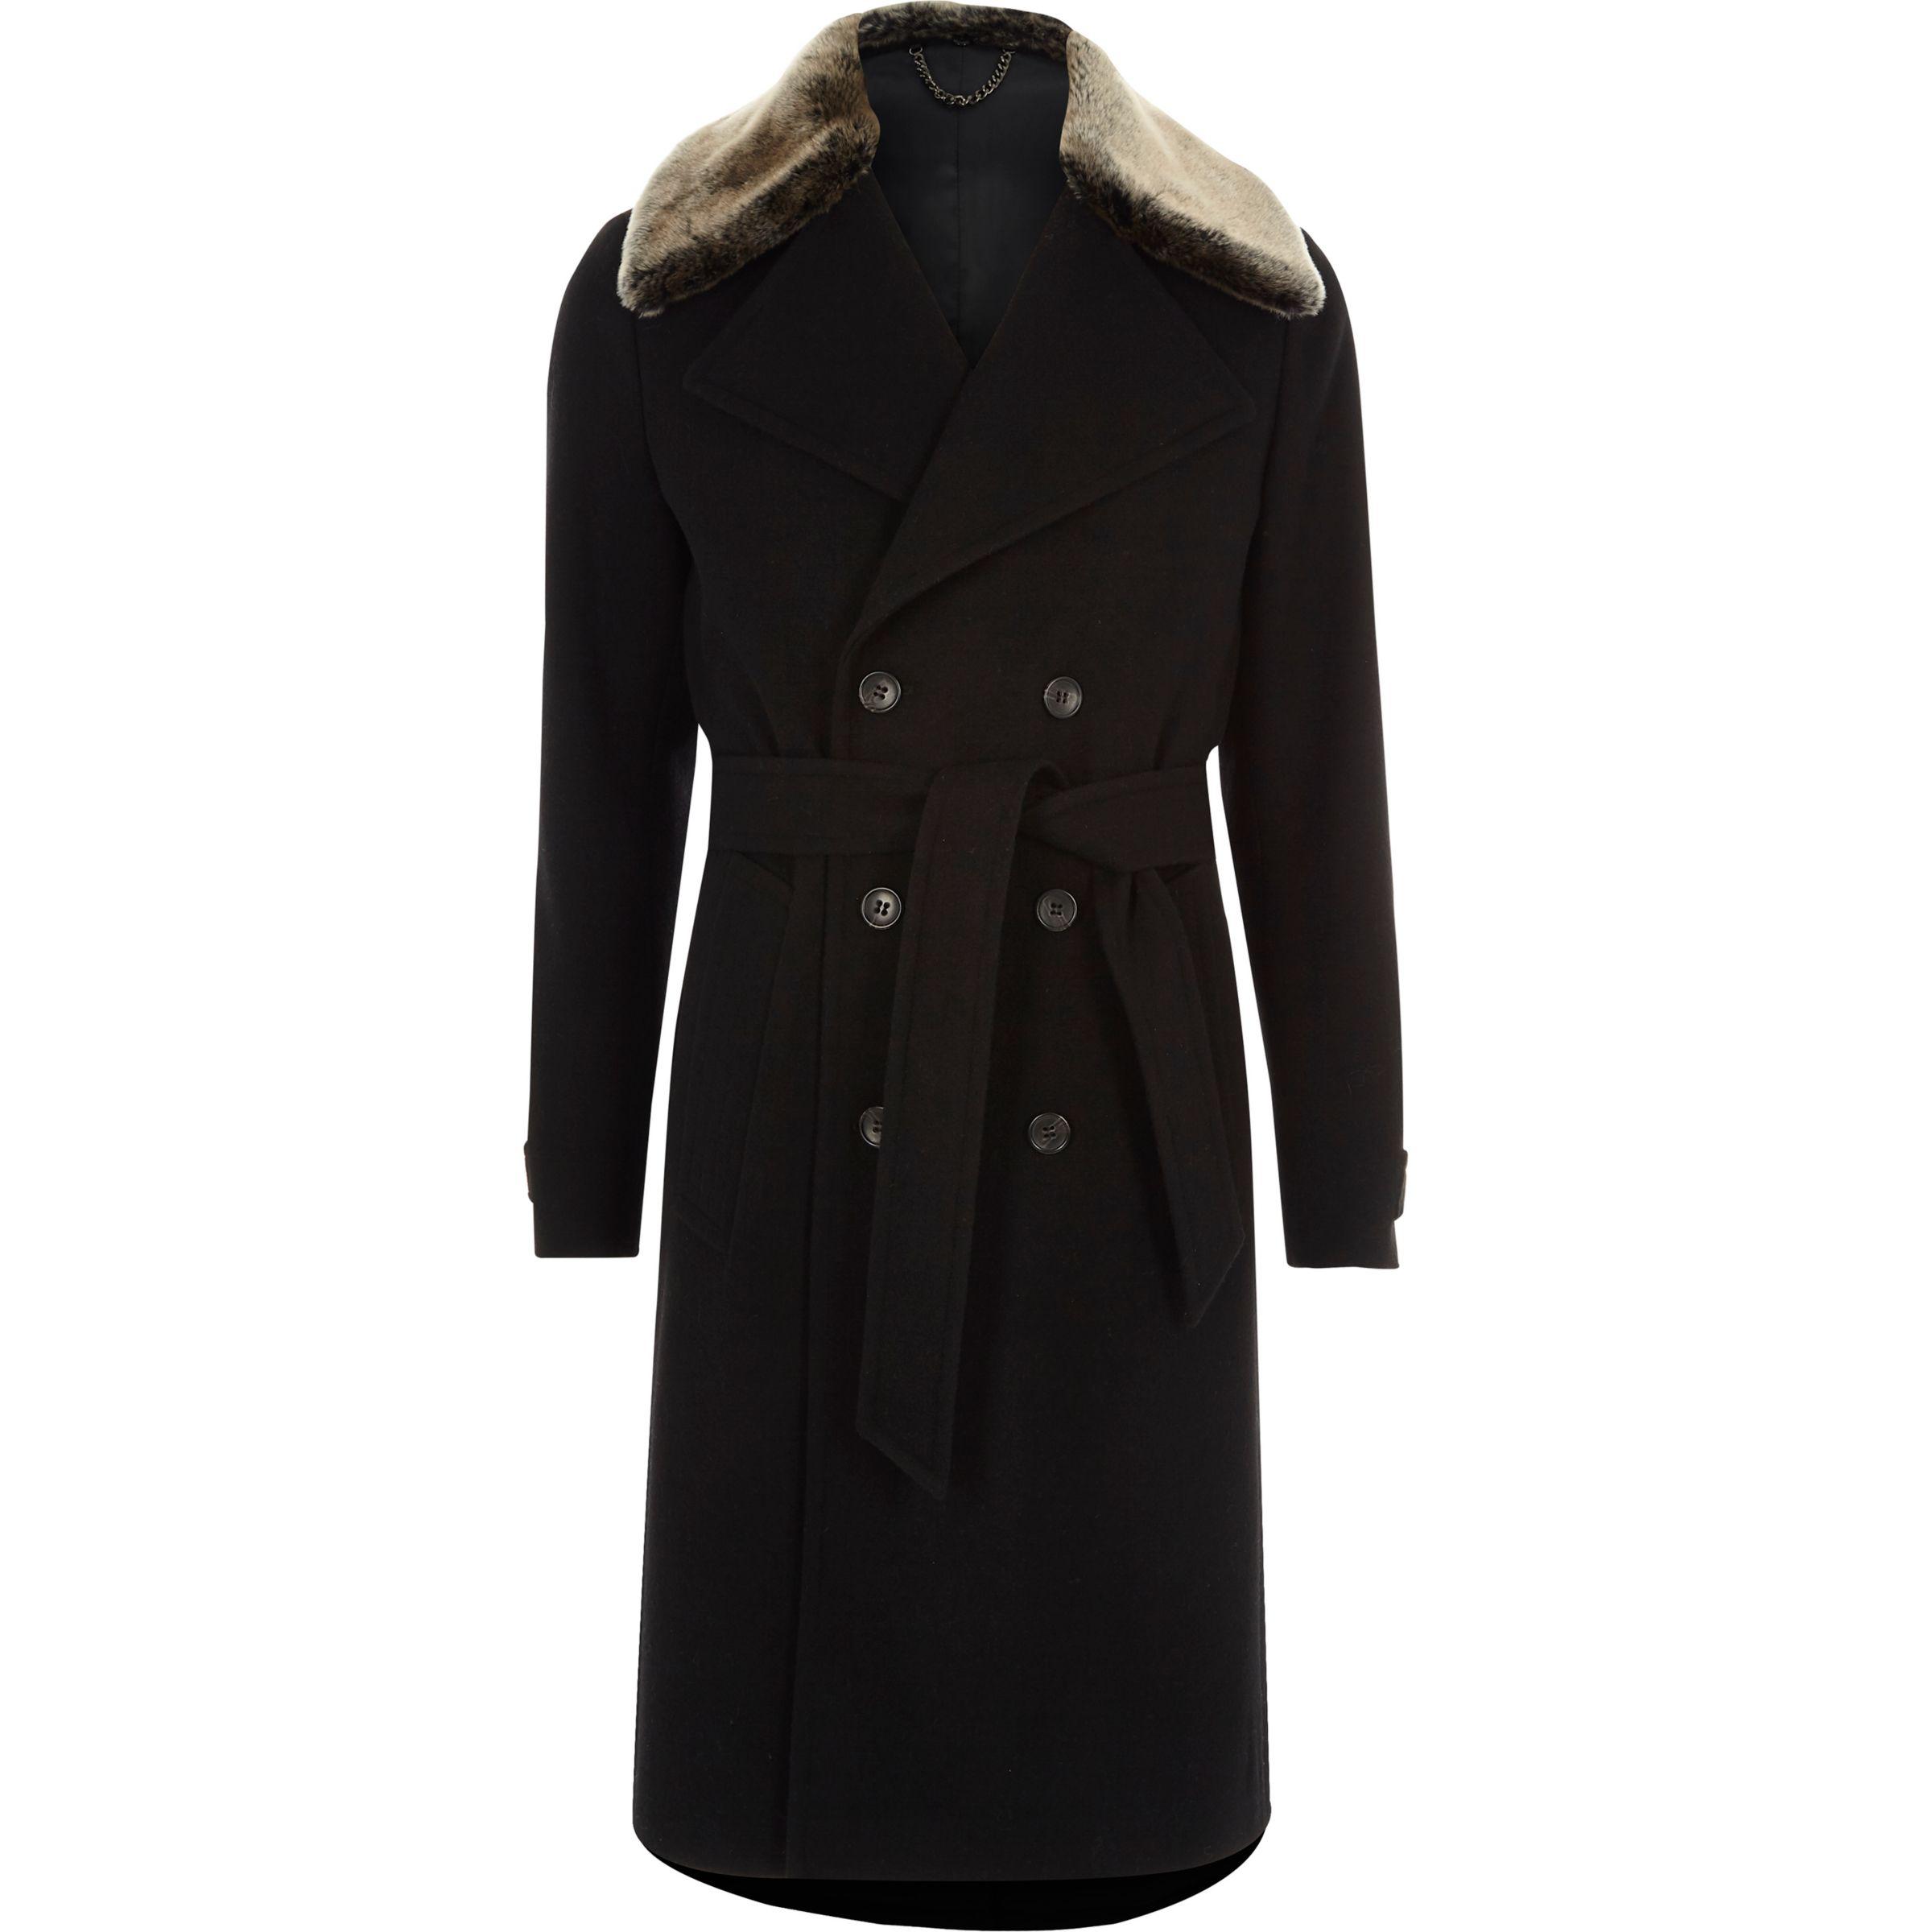 Lyst - River Island Black Faux Fur Collar Belted Trench Coat in Black ...